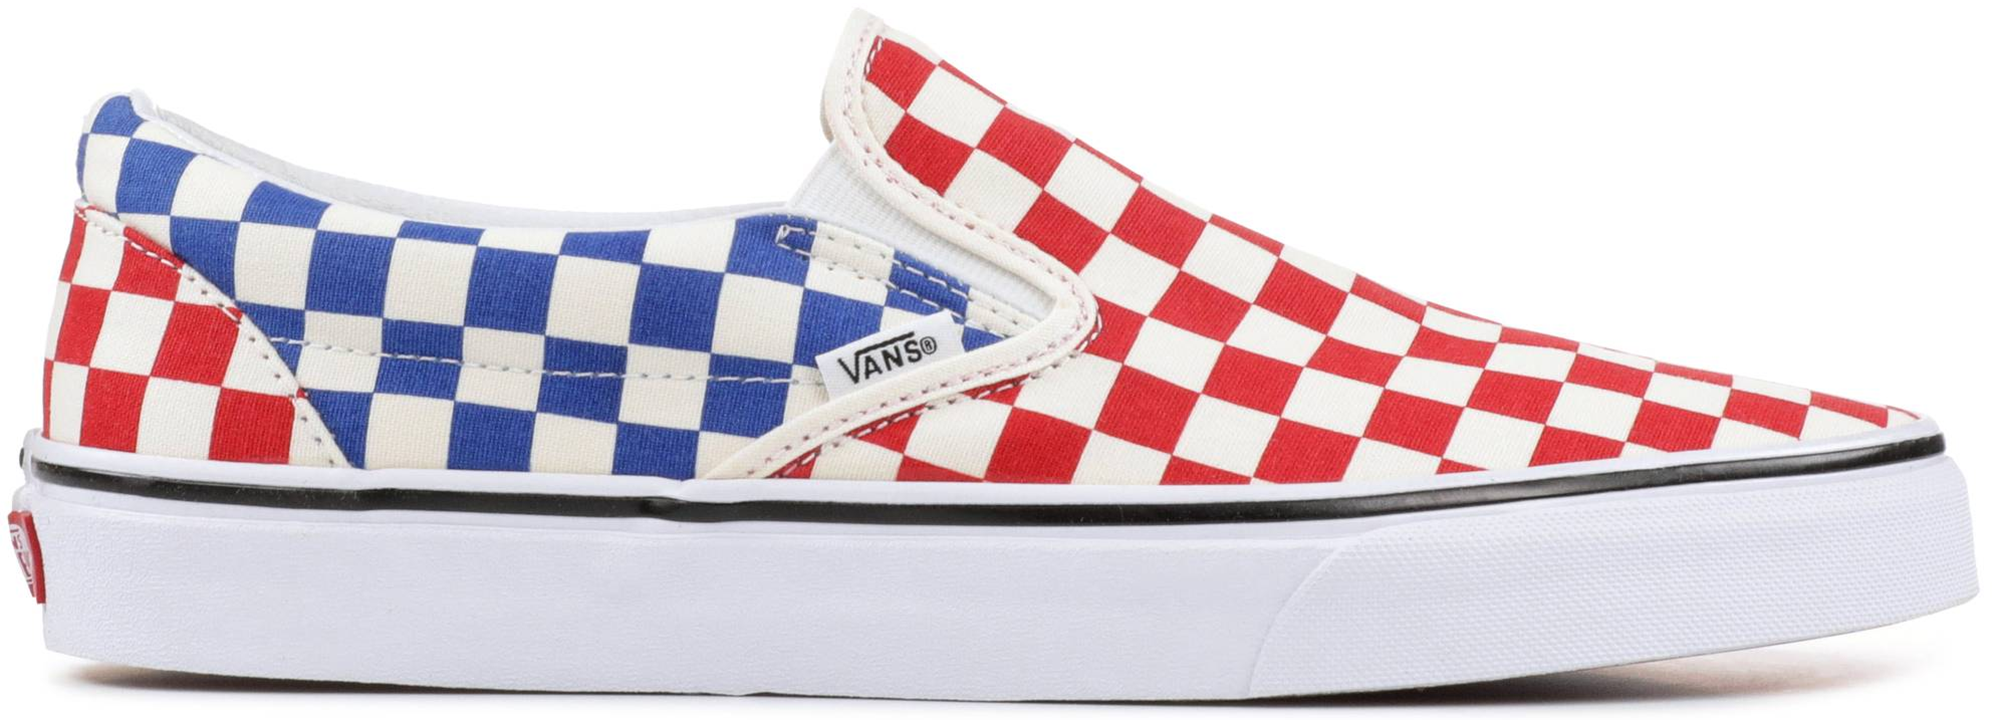 red checkerboard vans size 7